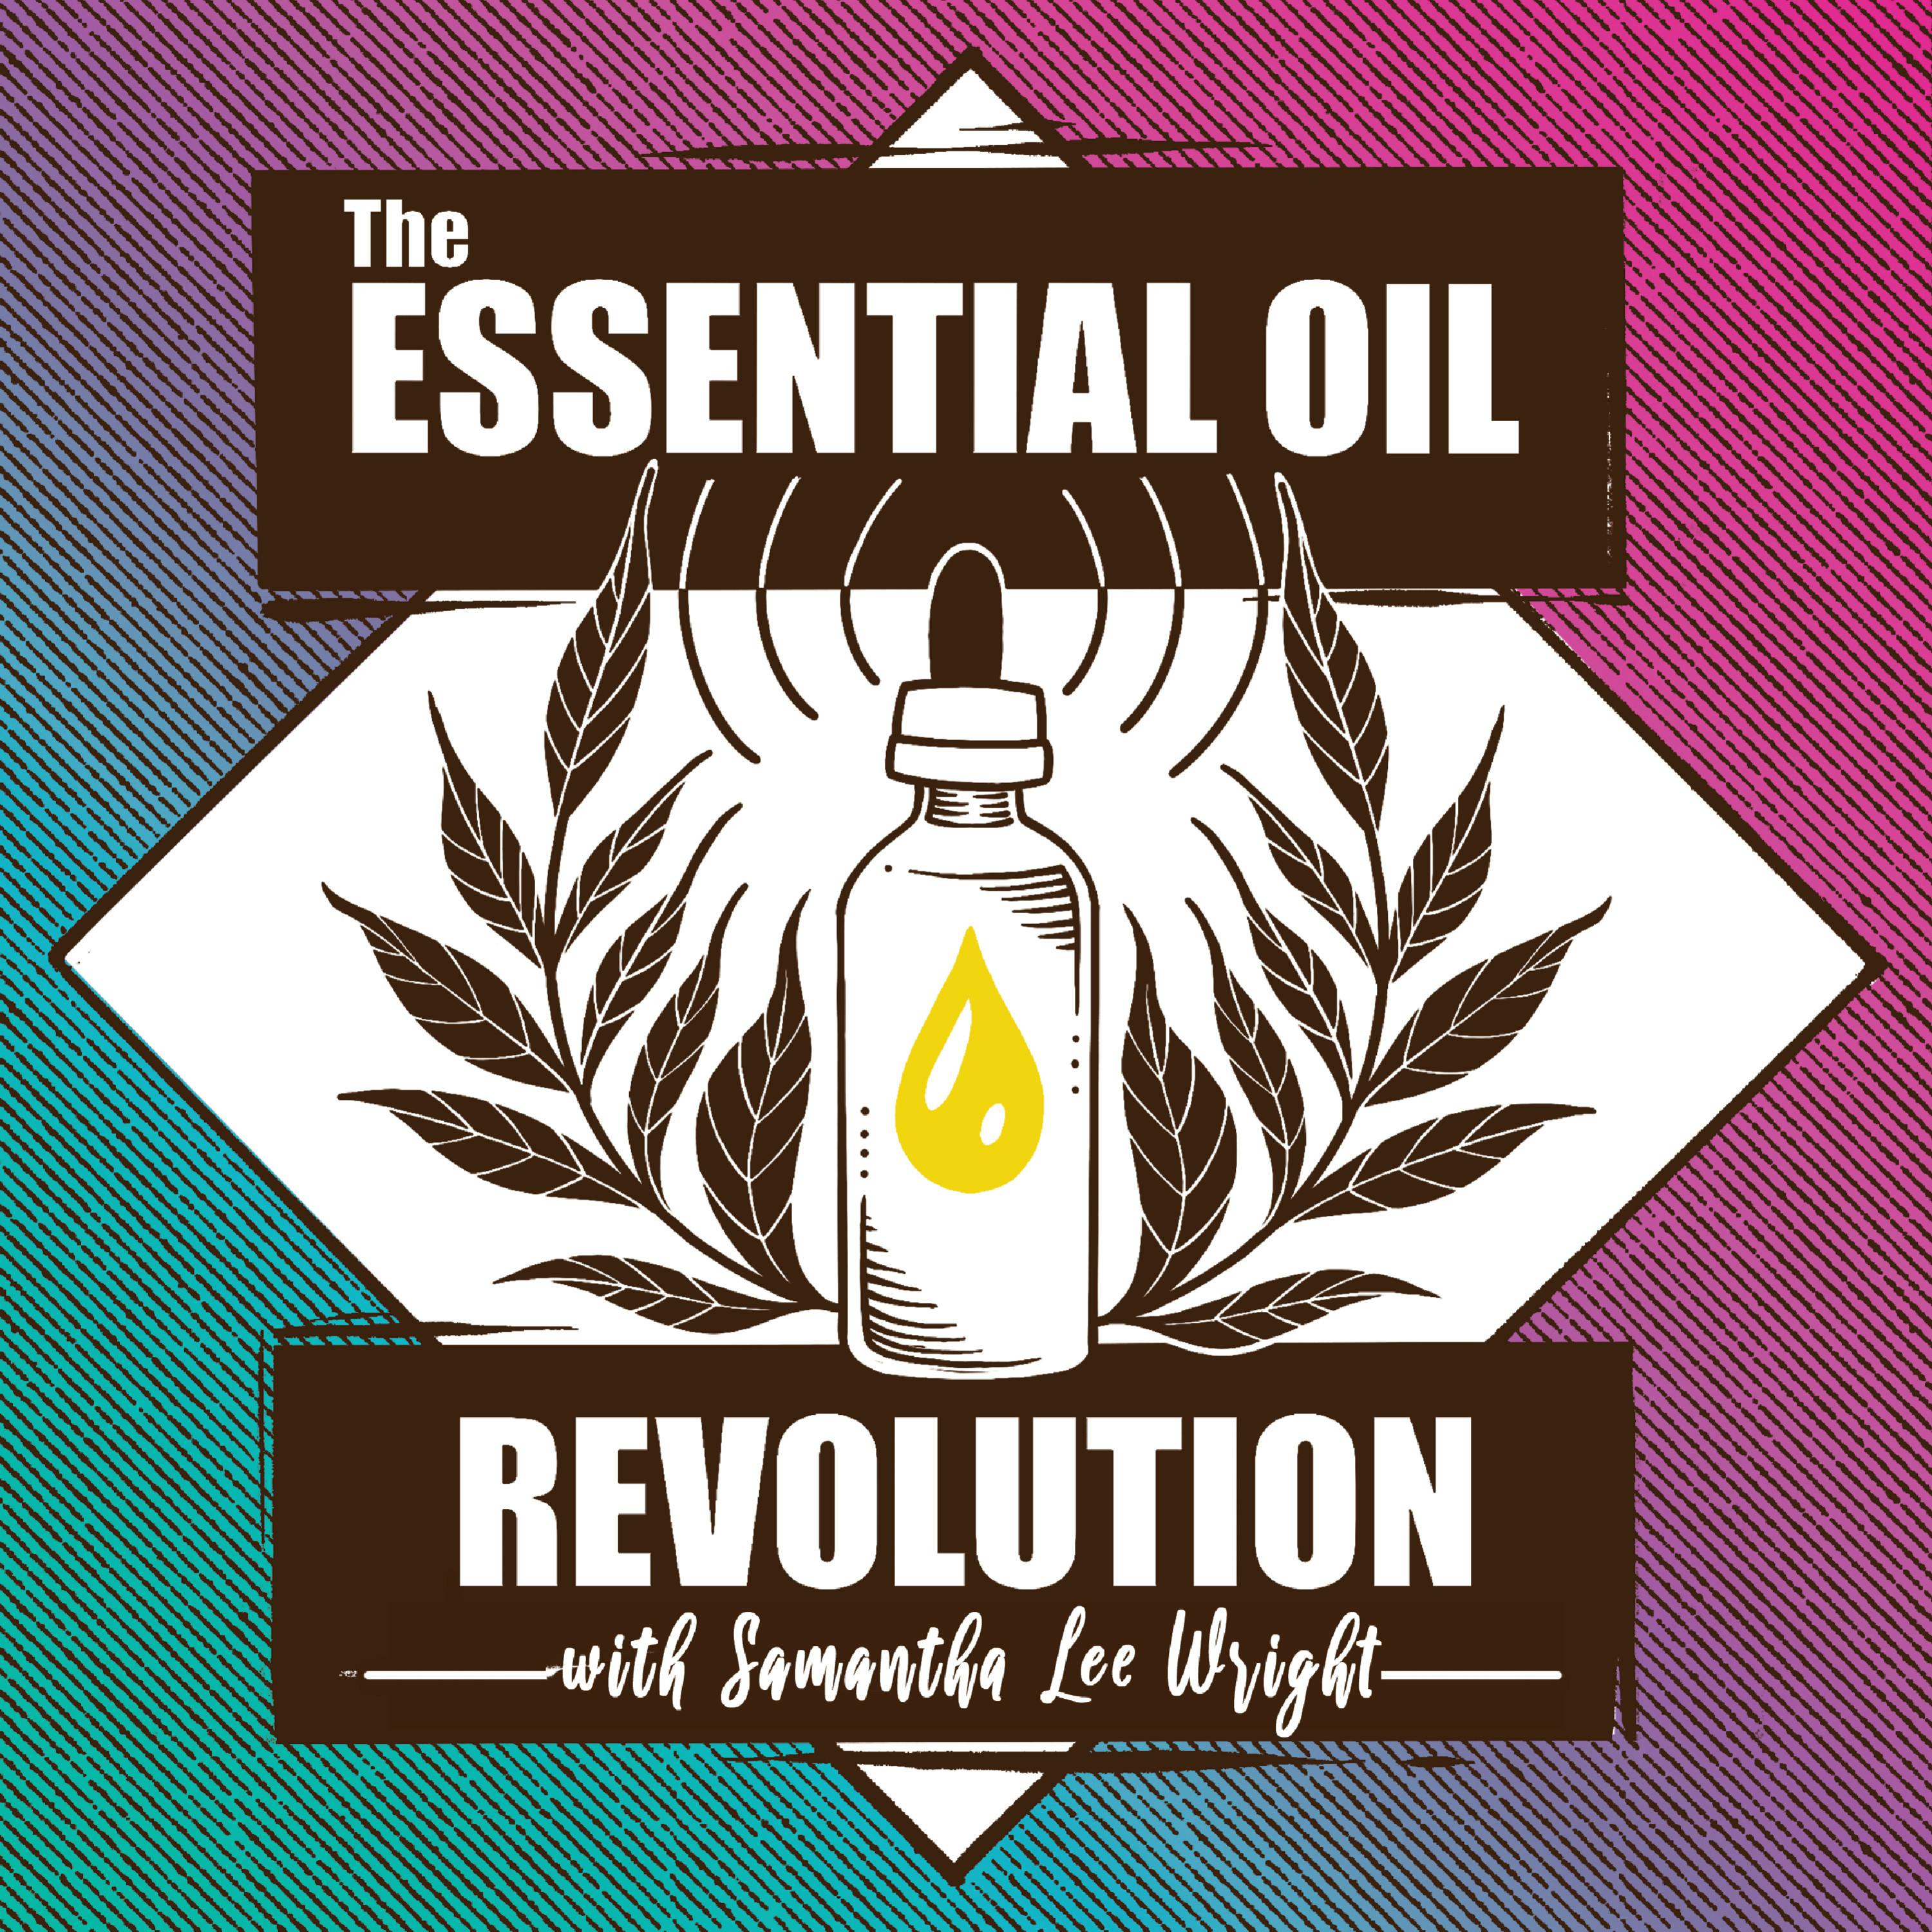 374: Essential Oils, Inflammation, and Biofilm w/ Dr. John Lieurance